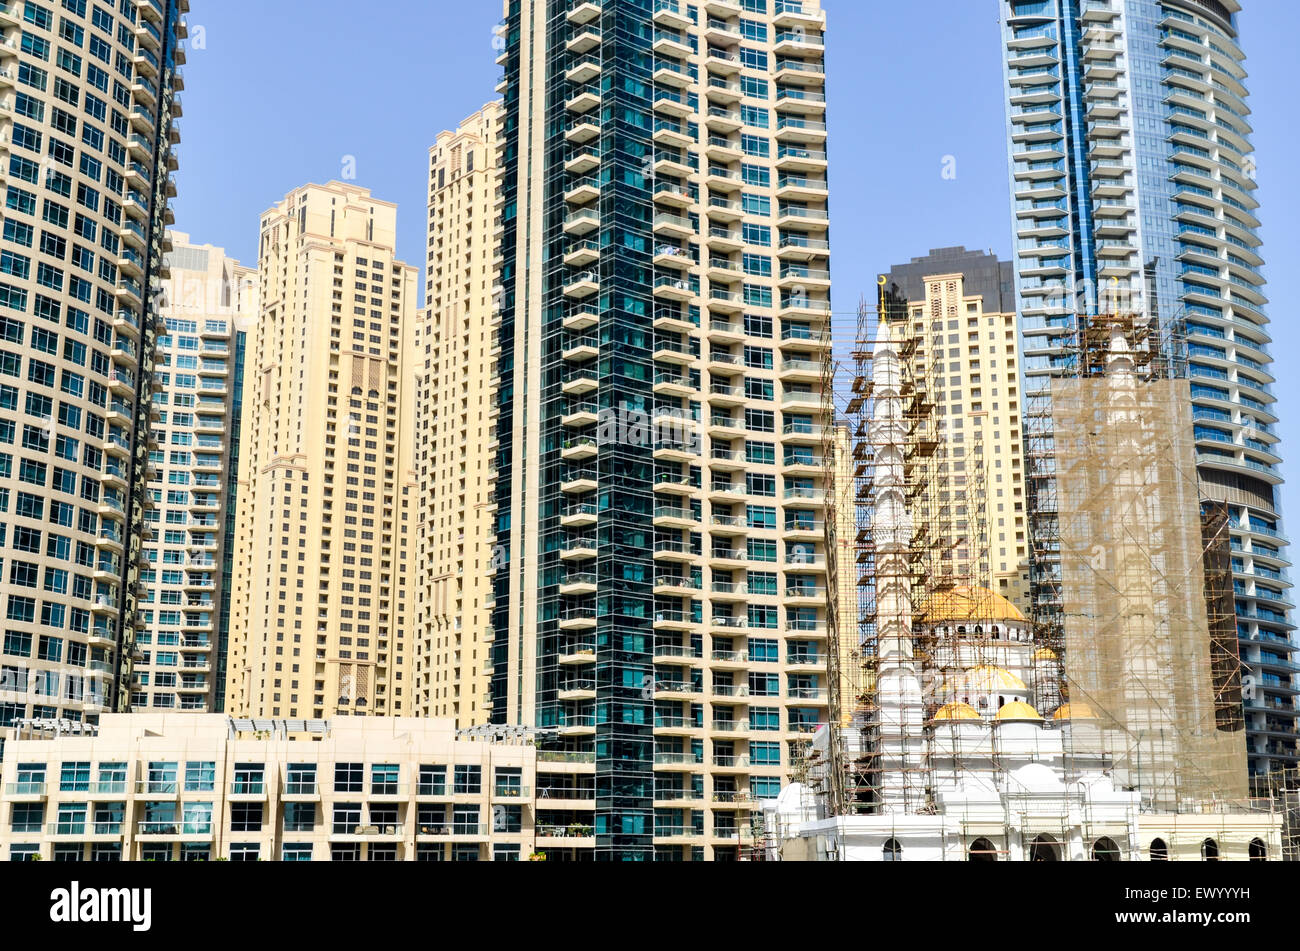 Mosque in construction among the modern high rise buildings, towers and hotels of the Dubai Marina, United Arab Emirates Stock Photo